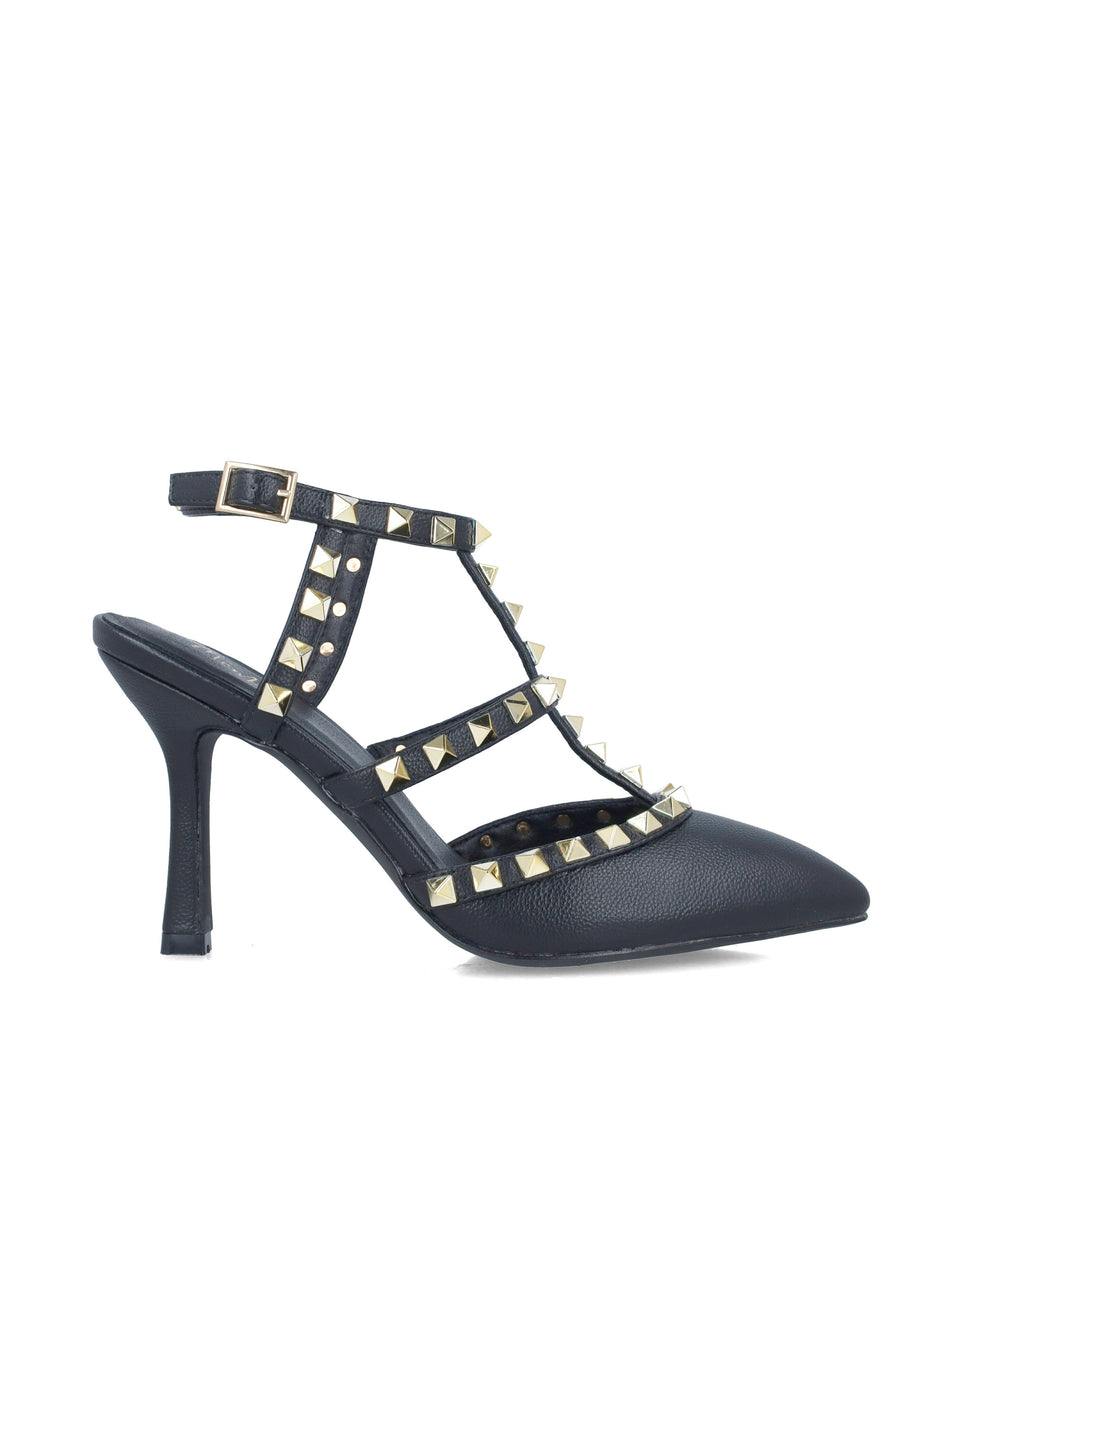 Black Studded Pumps With T-Strap_24915_01_01